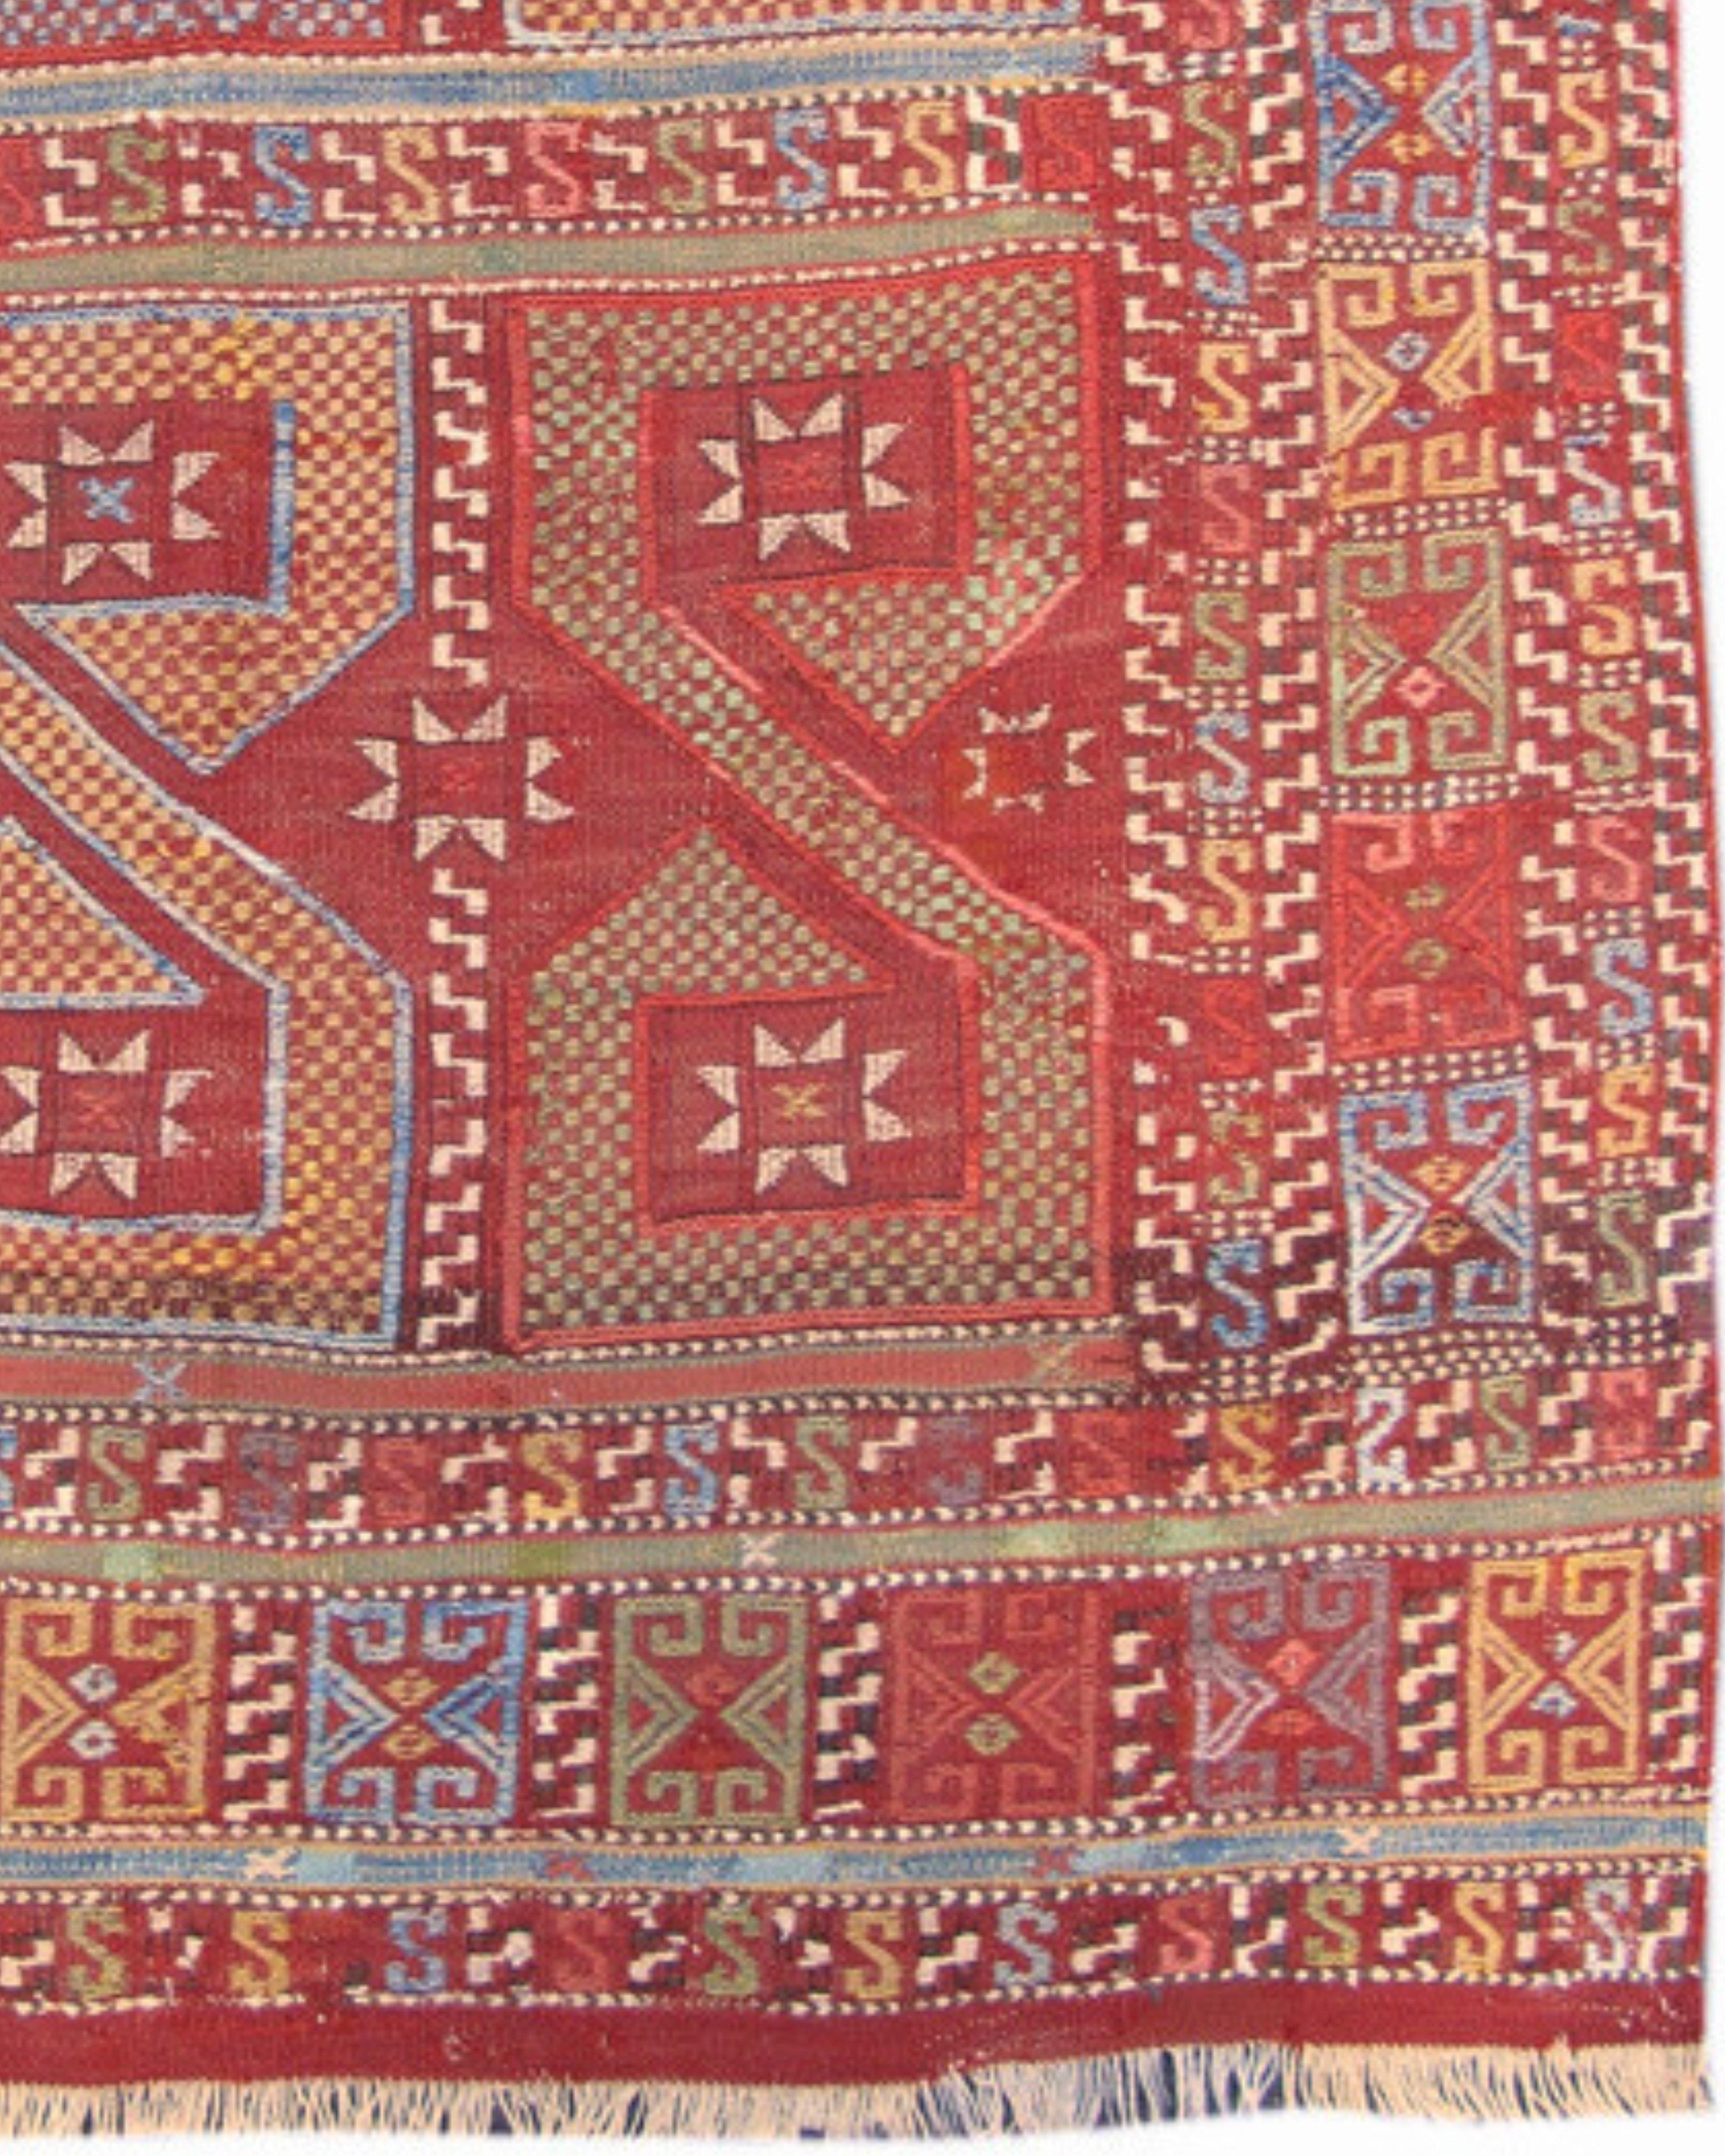 Wool Antique Red Turkish Jajim Flat-Weave Rug, Mid-19th Century  For Sale